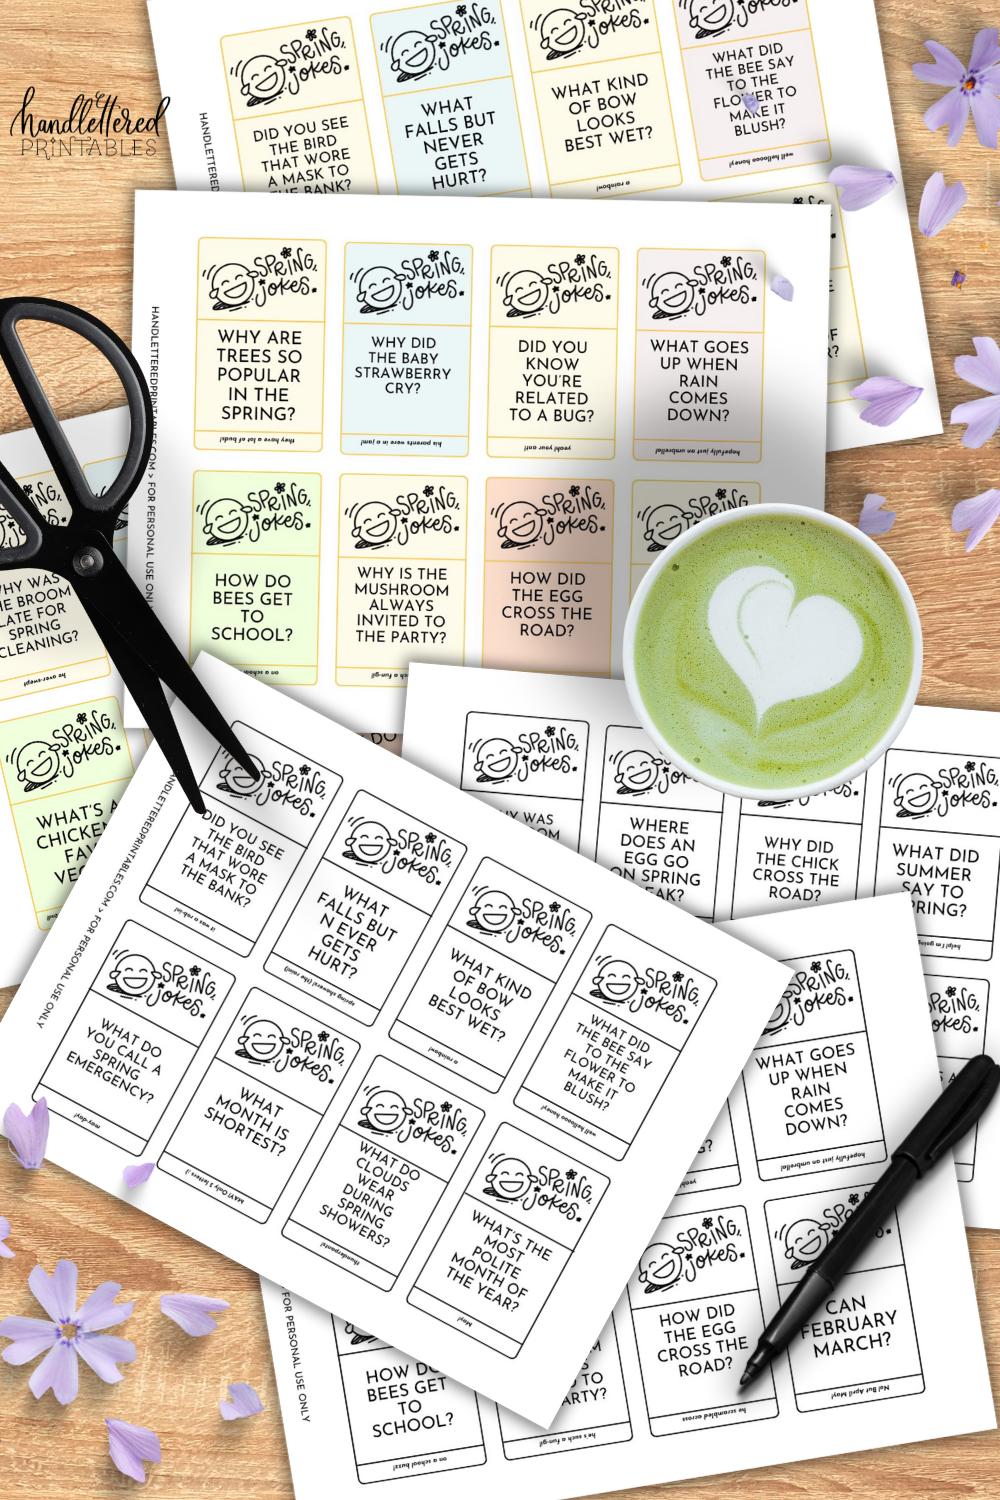 image of both color and black and white version of the spring jokes cards free printable printed on a wooden table with purple flowers, a matcha latte, pen and scissors. joke cards feature a hand lettered title and illustrated laughing emoji with the jokes.